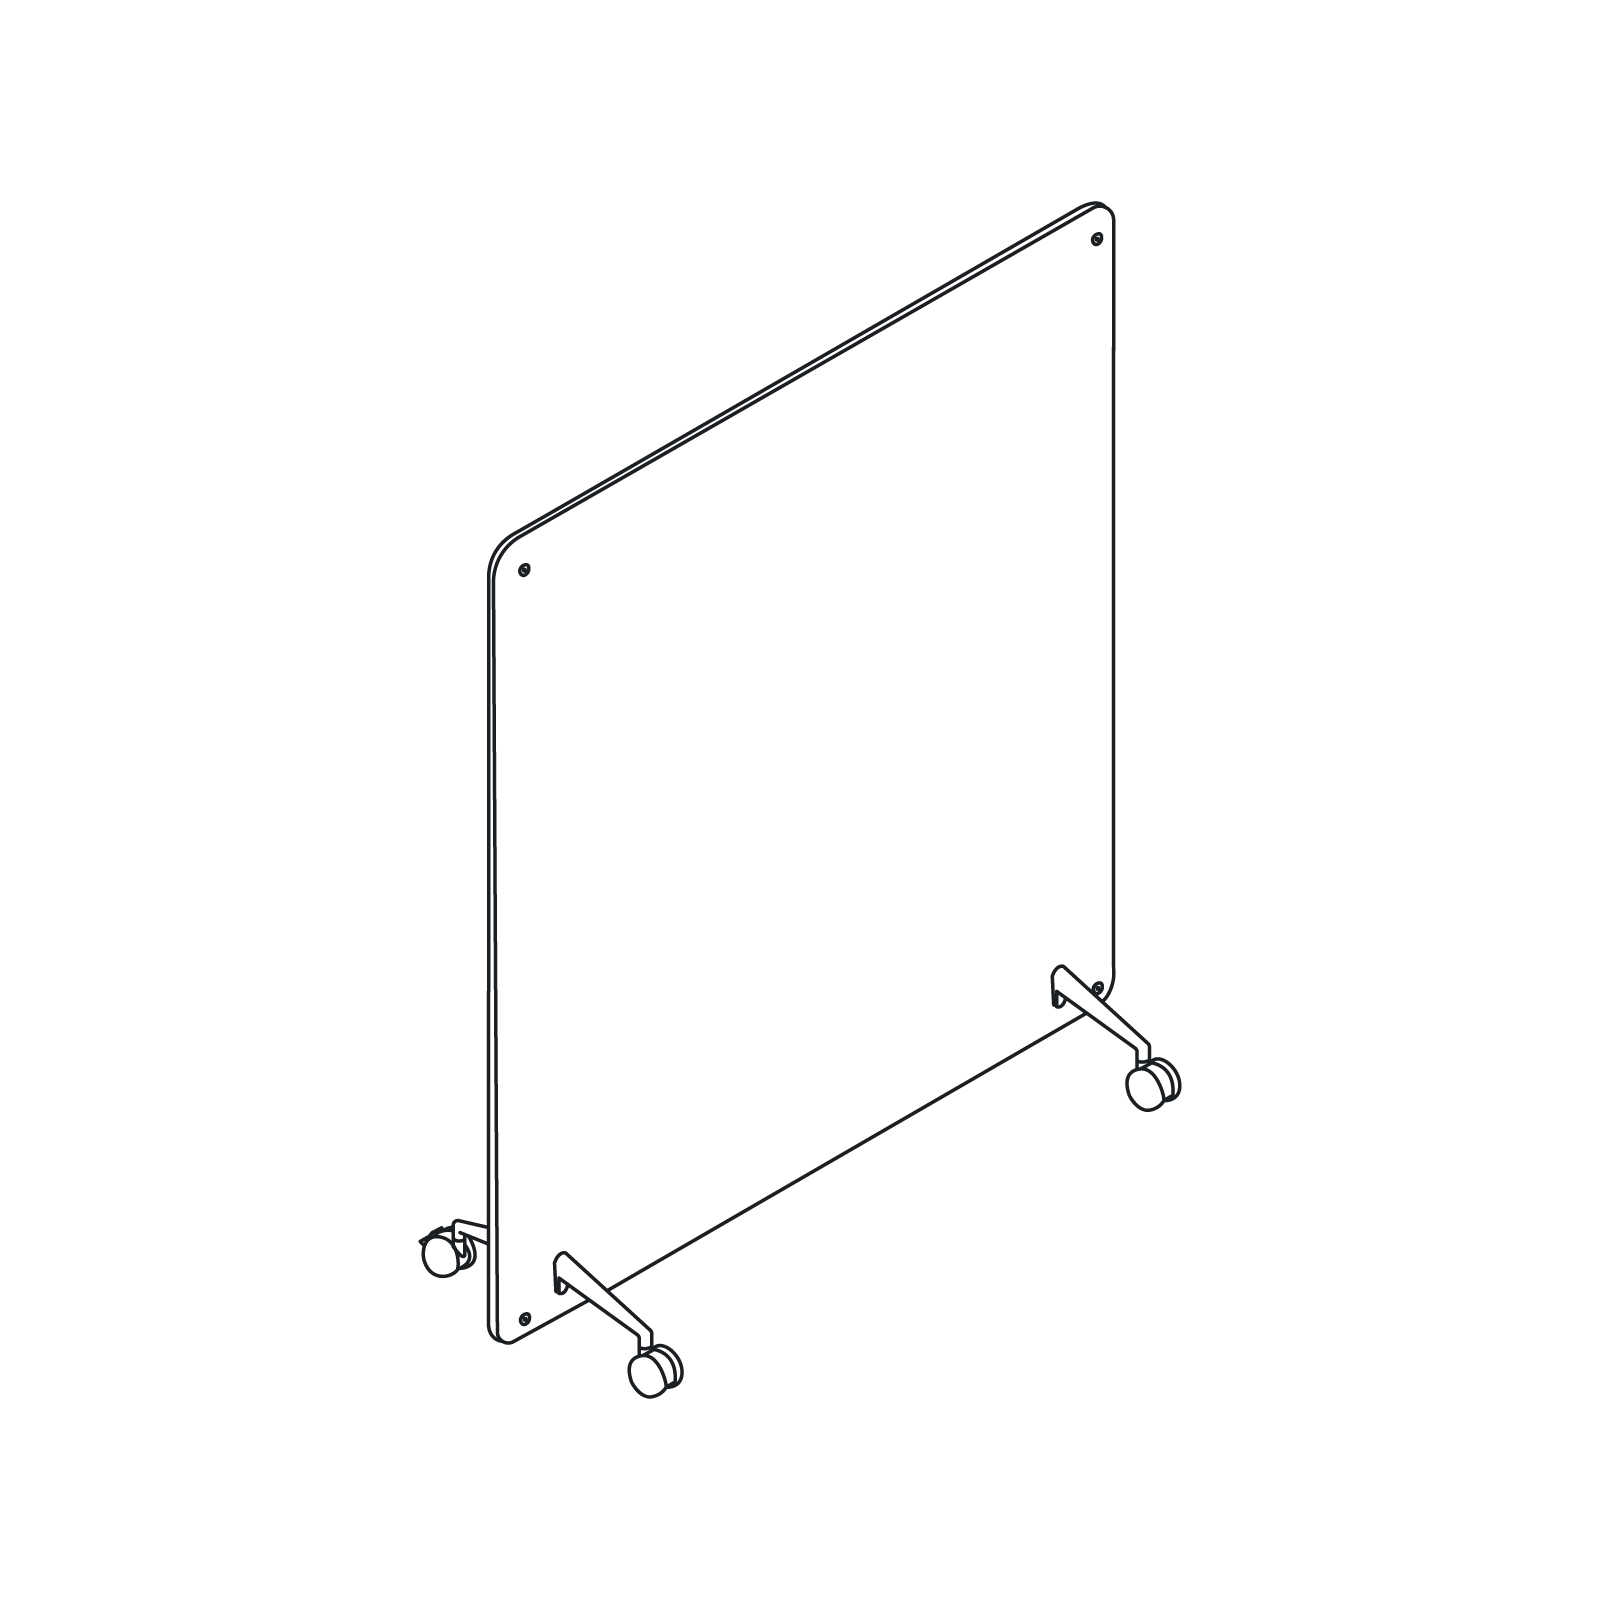 A line drawing - Bound Mobile Screen